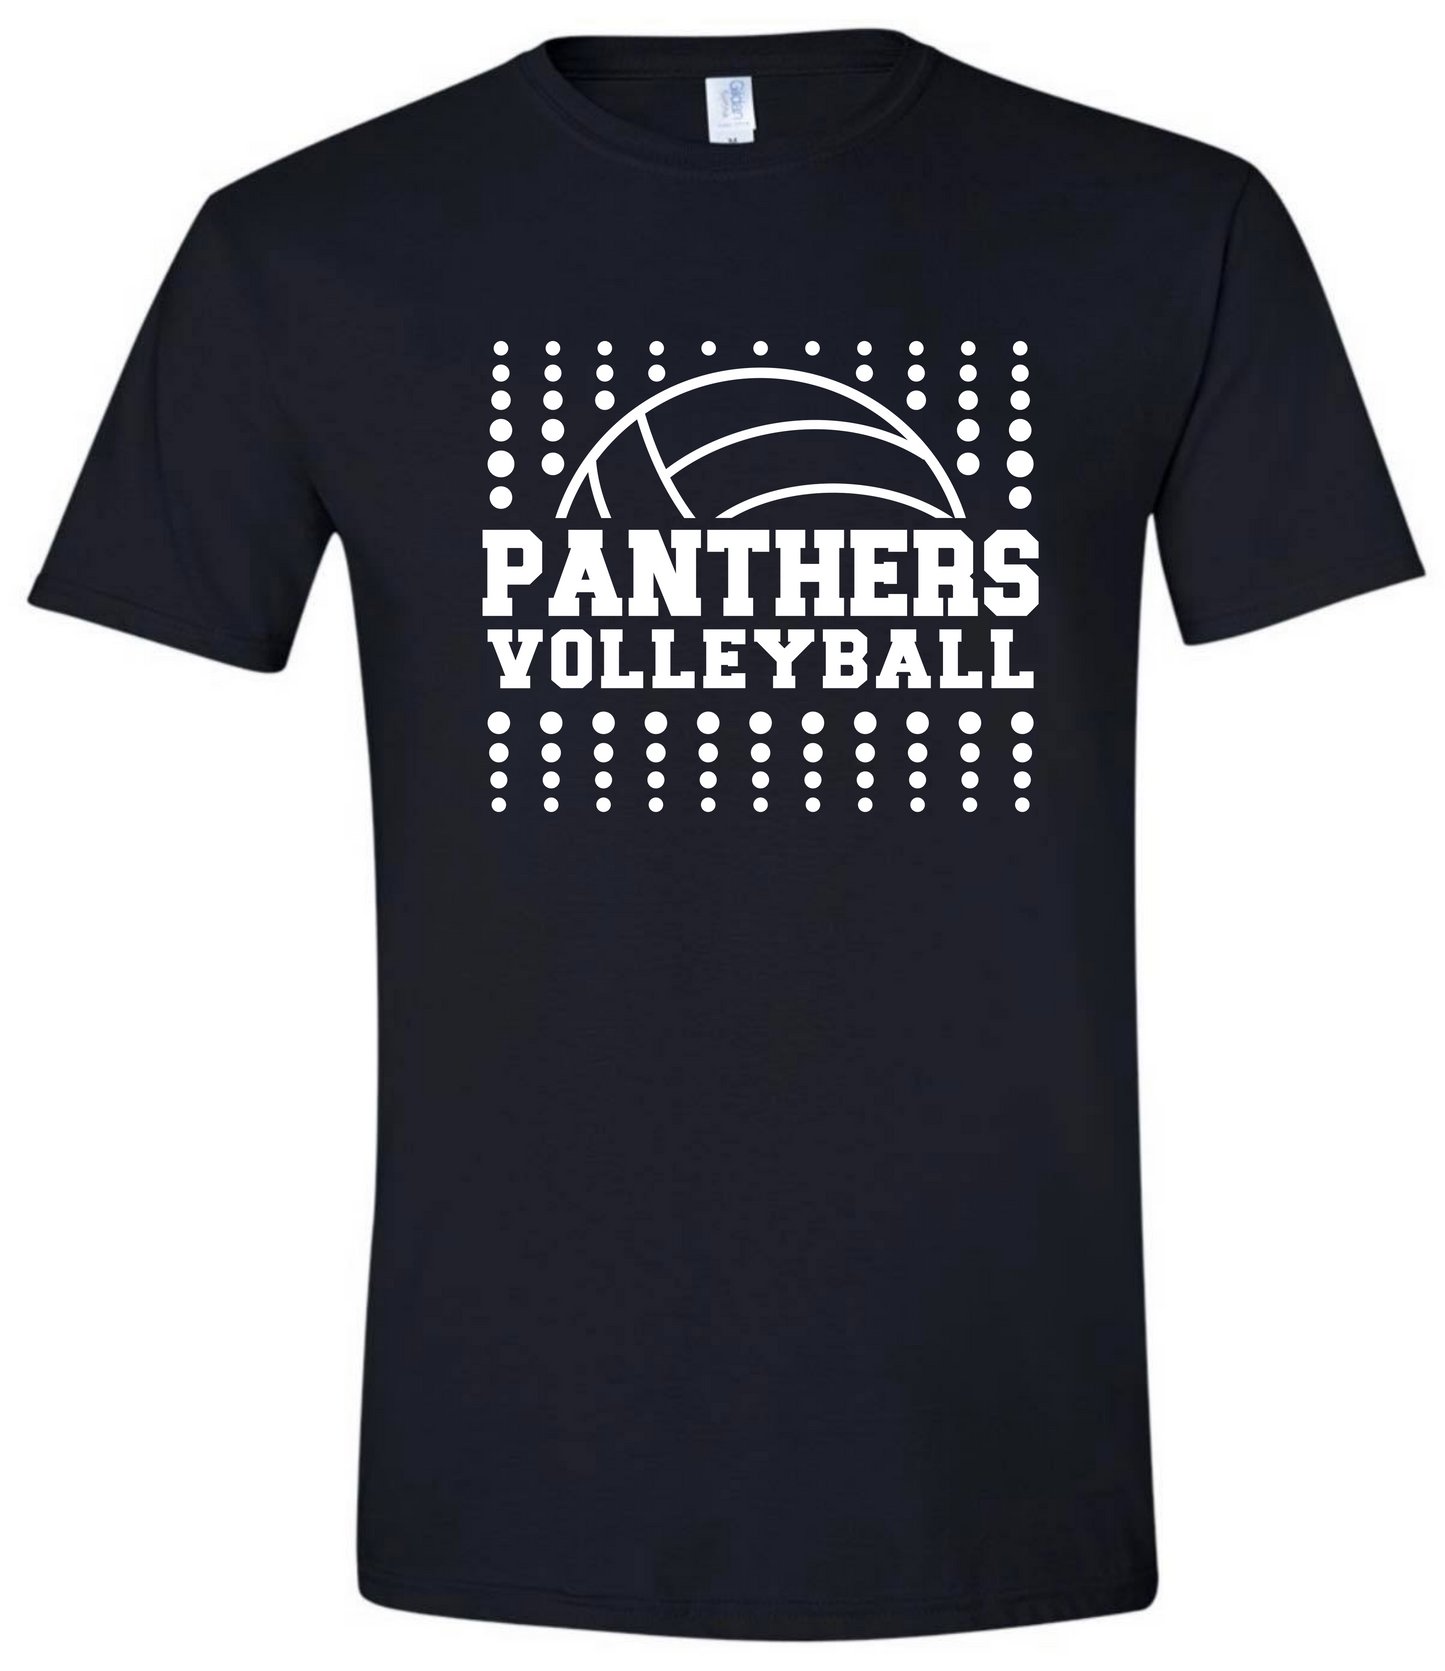 Panthers Volleyball Dot Tshirt